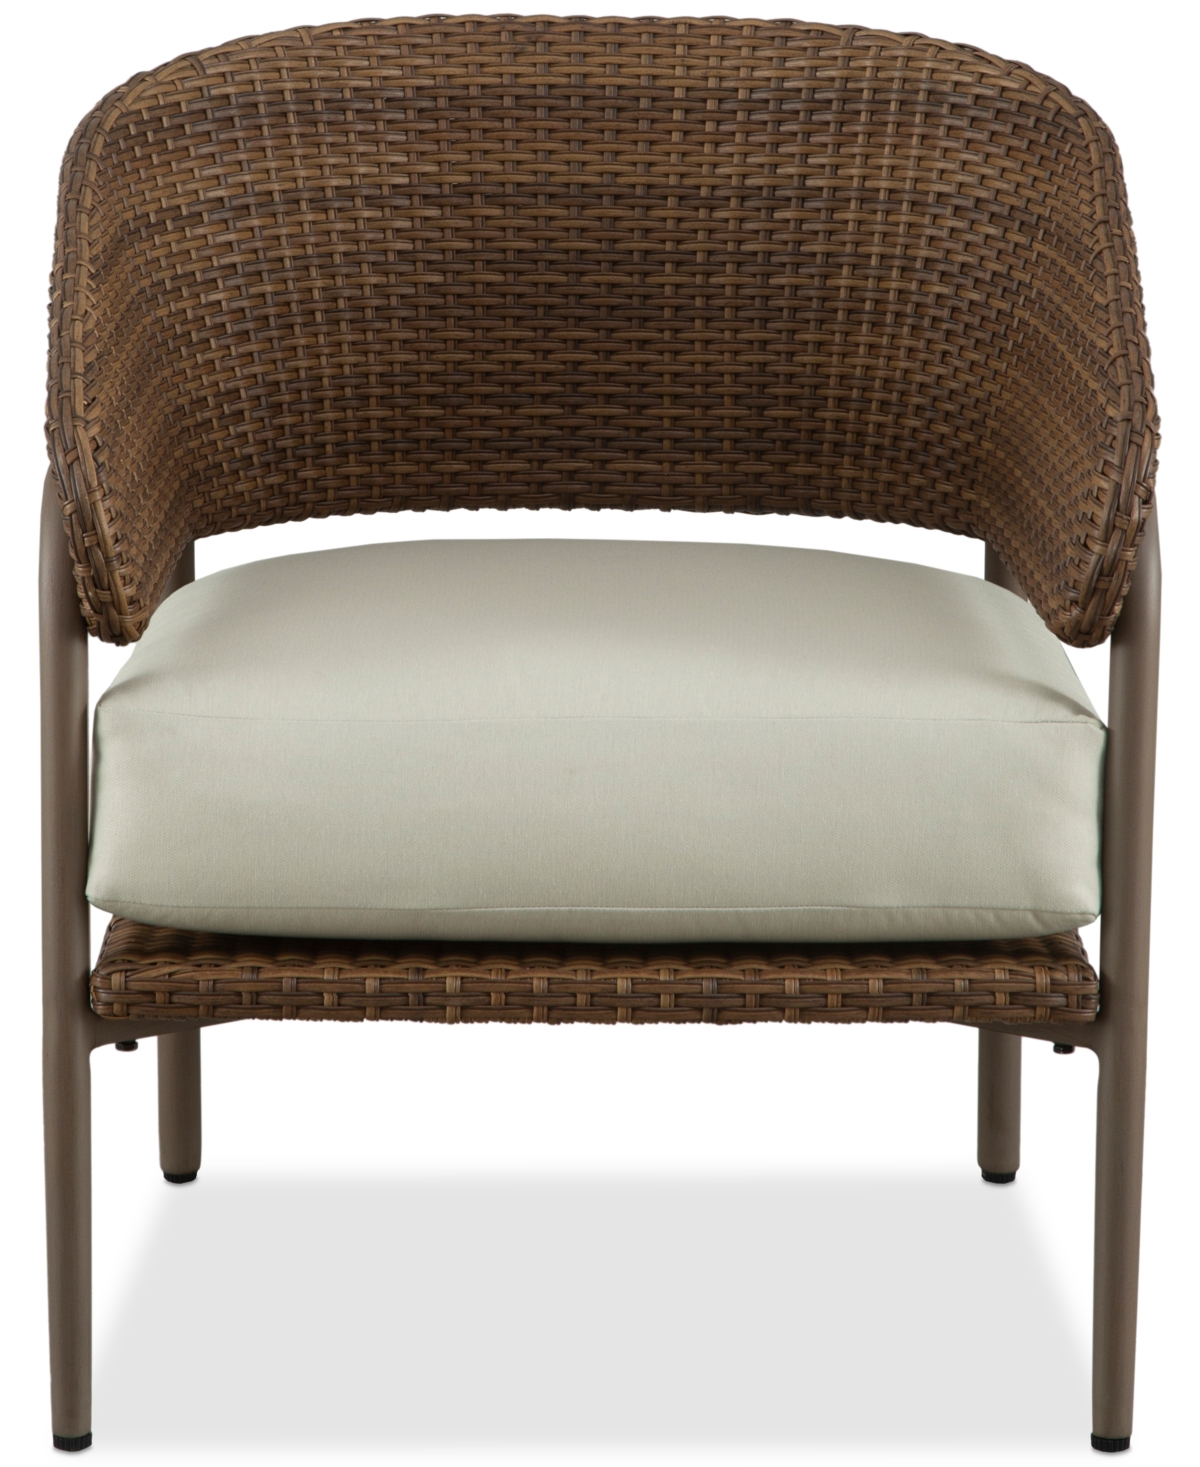 Drew & Jonathan Home Skyview Outdoor Lounge Chair In Driftwood